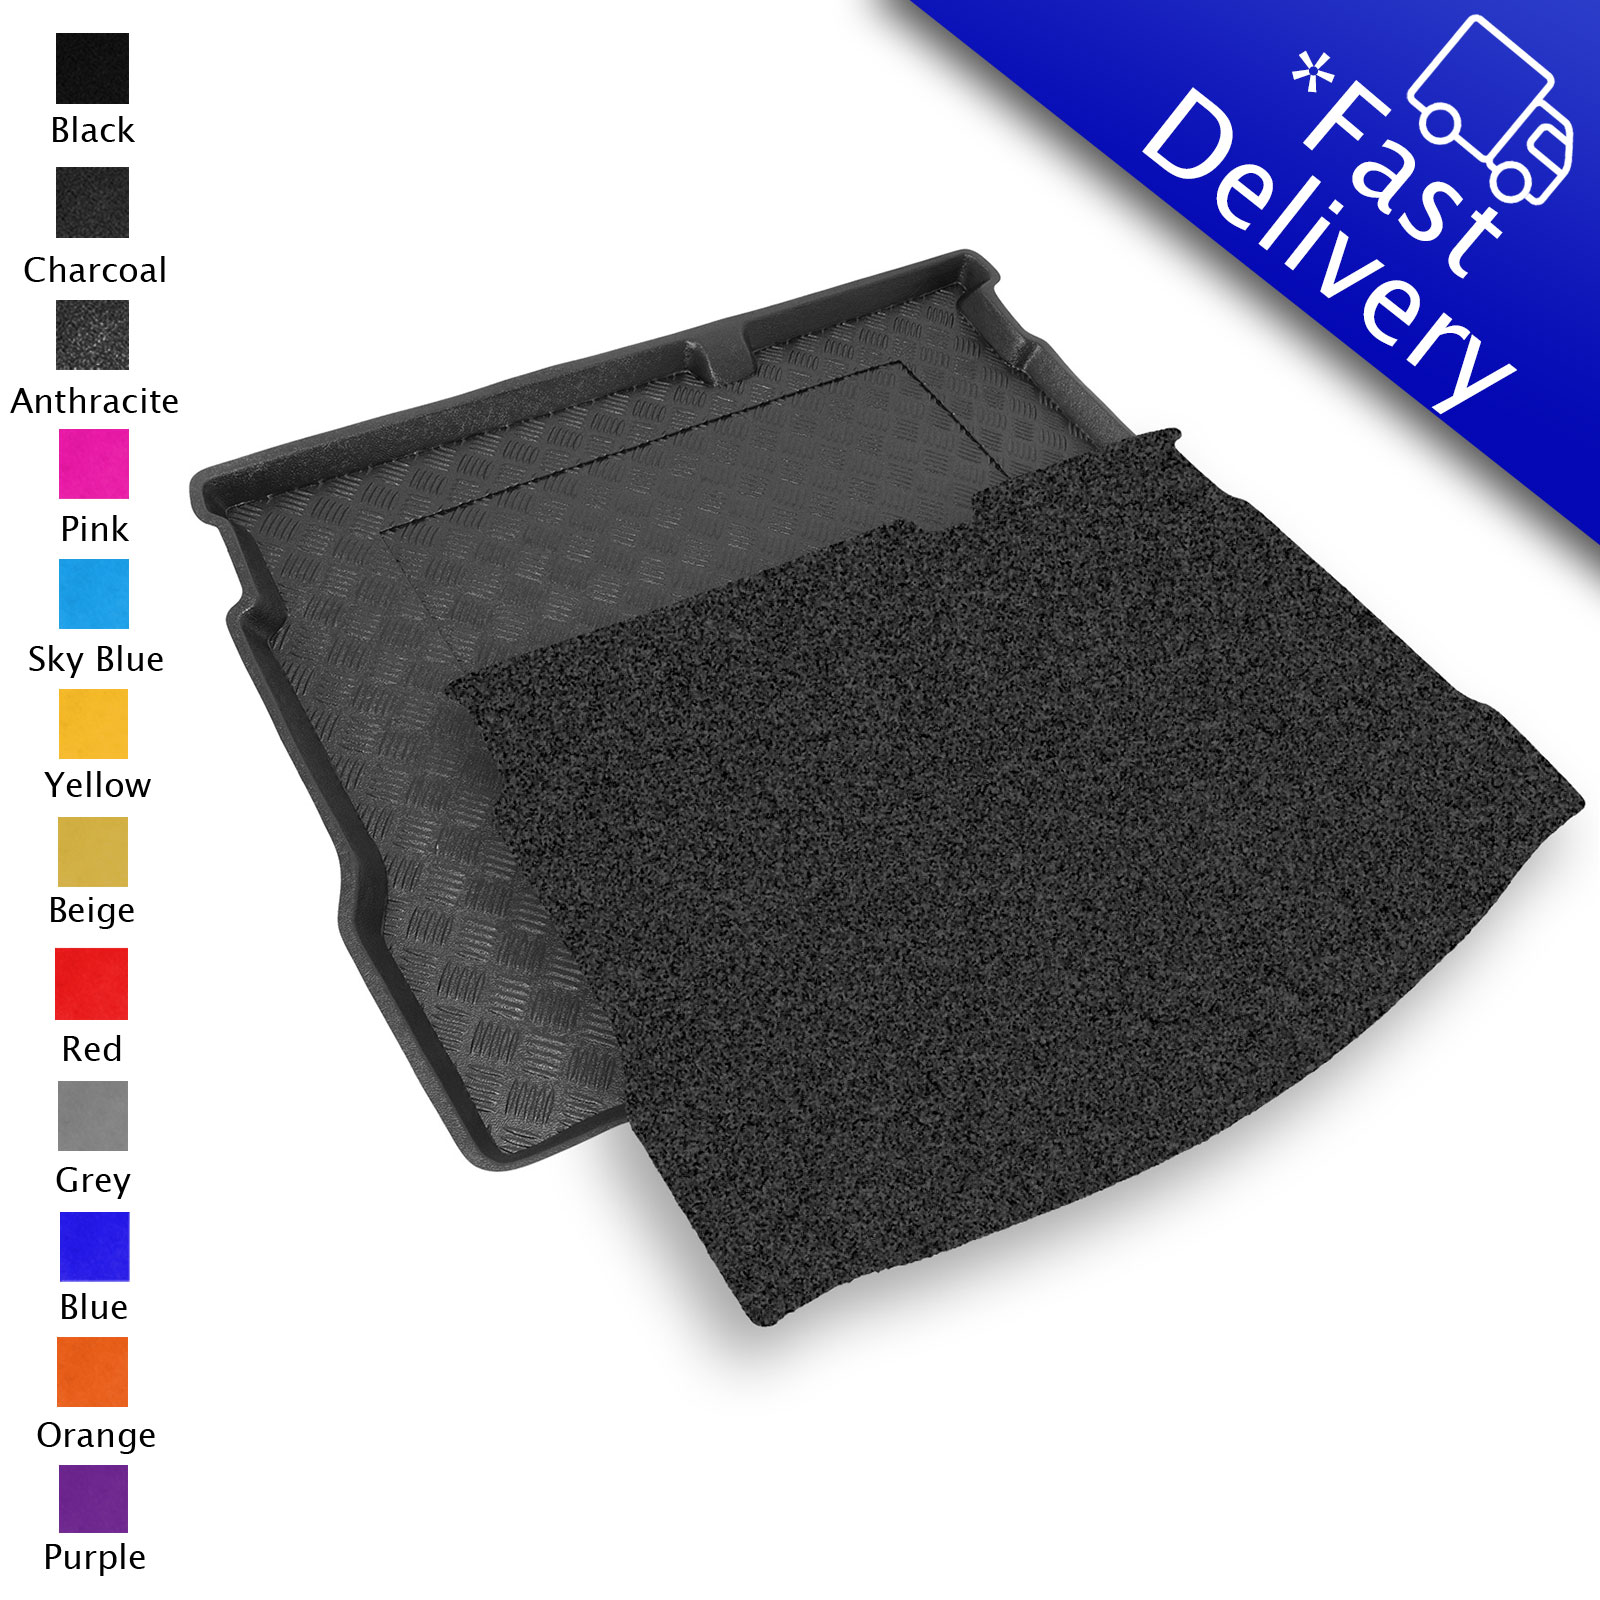 Fully Tailored PVC Boot Liner/Mat/Tray carmats4u To fit XC90 2015 Anthracite Carpet Insert 